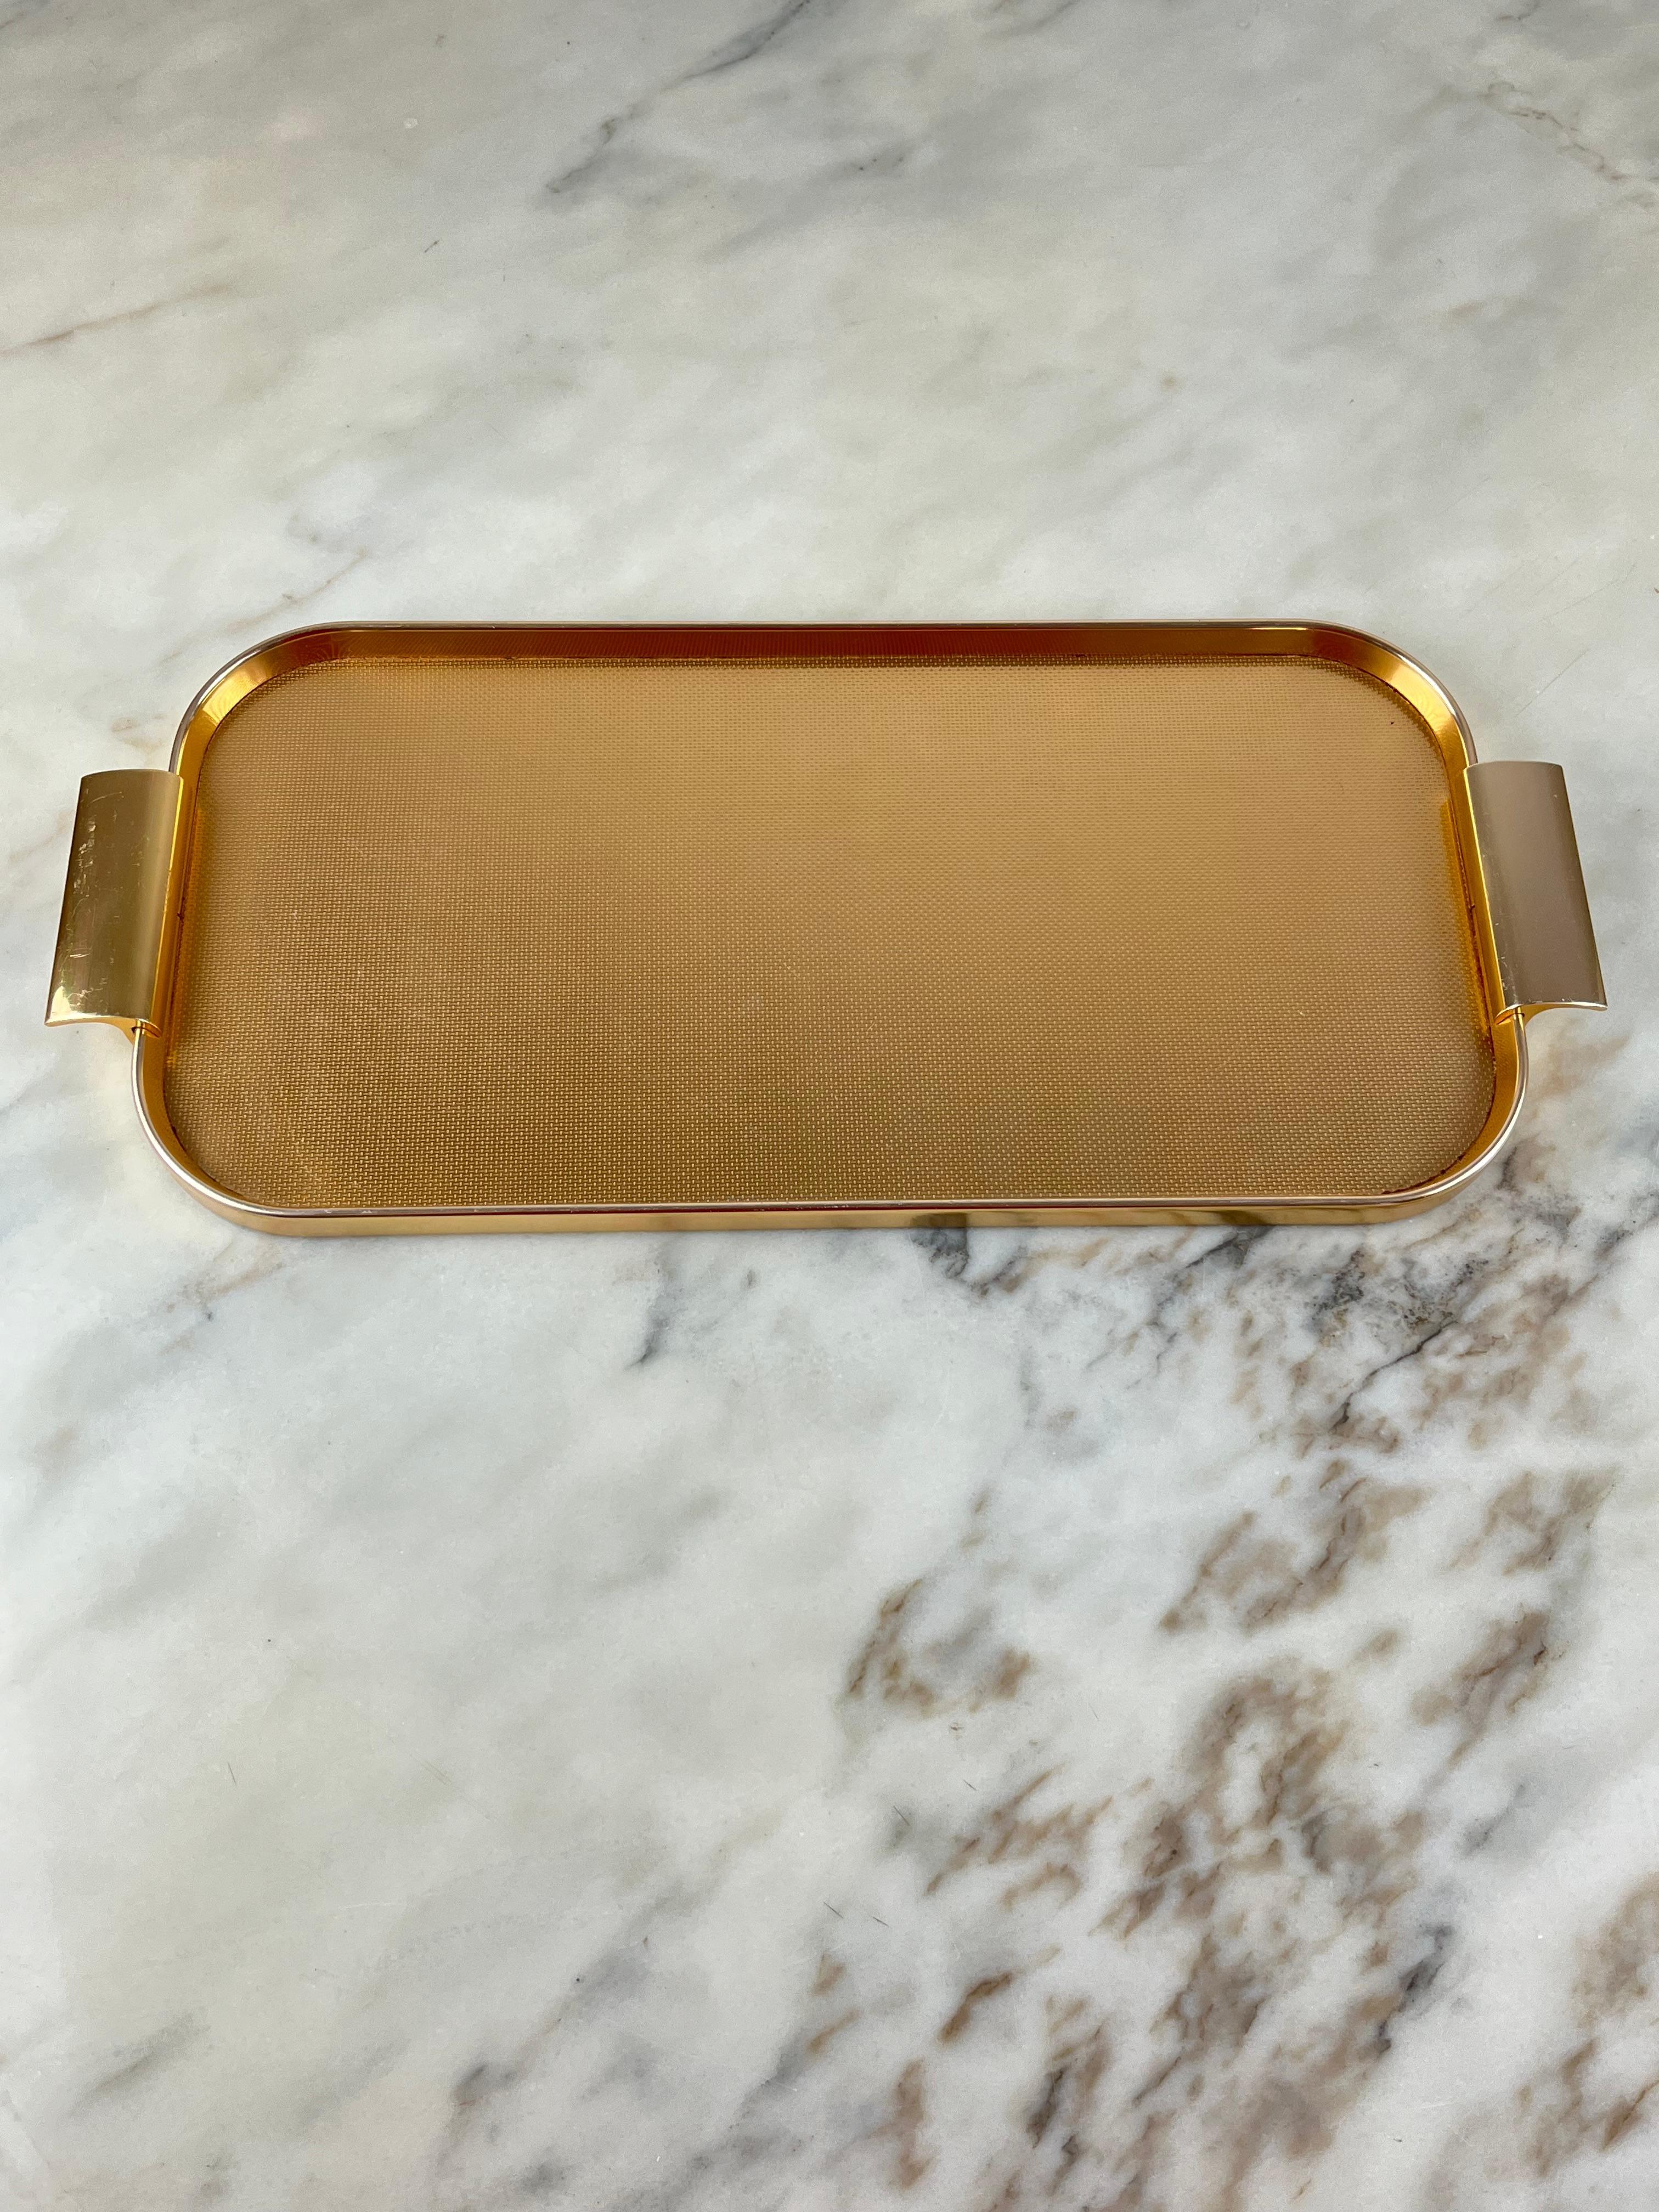 Golden aluminum tray Midcentury Italian design 1960s
Intact and in good condition, small signs of aging.